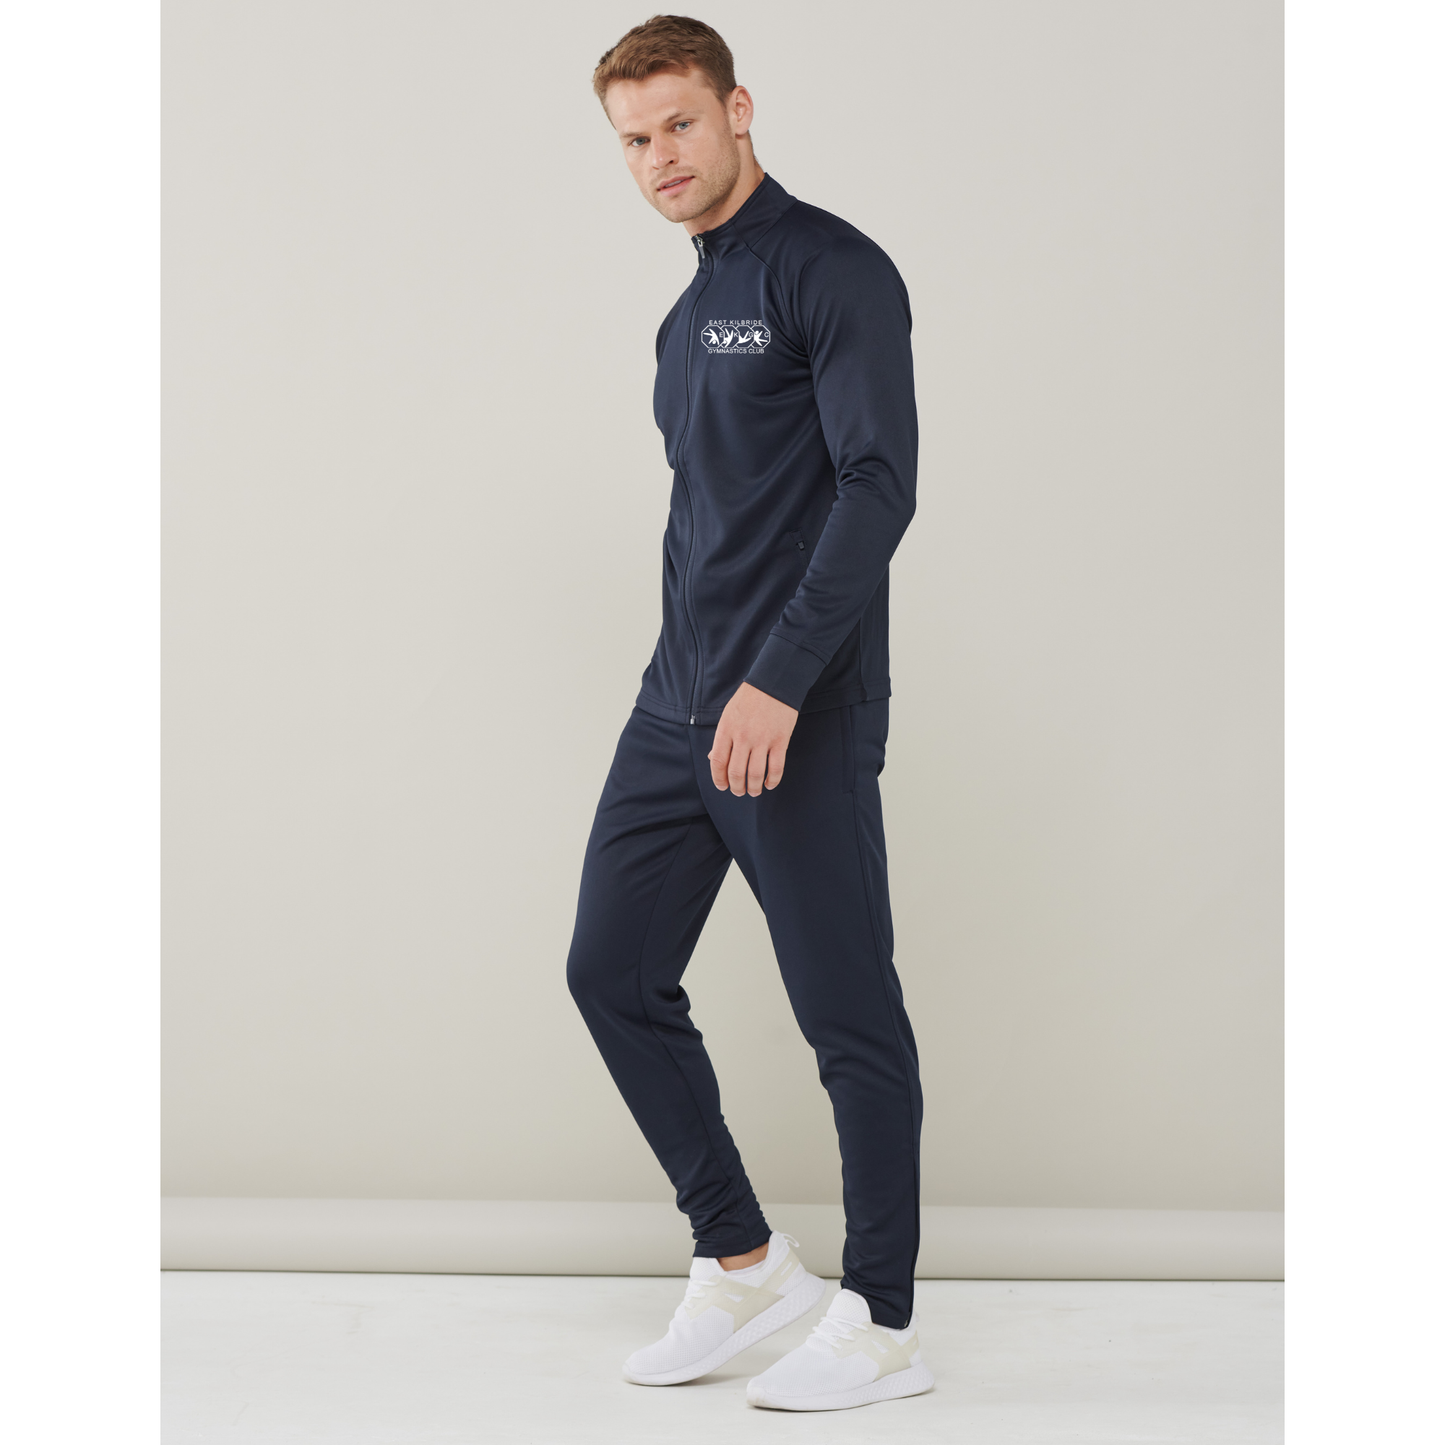 EKGC - COACH Competition Tracksuit Top and Bottoms - Full Zip (Copy)